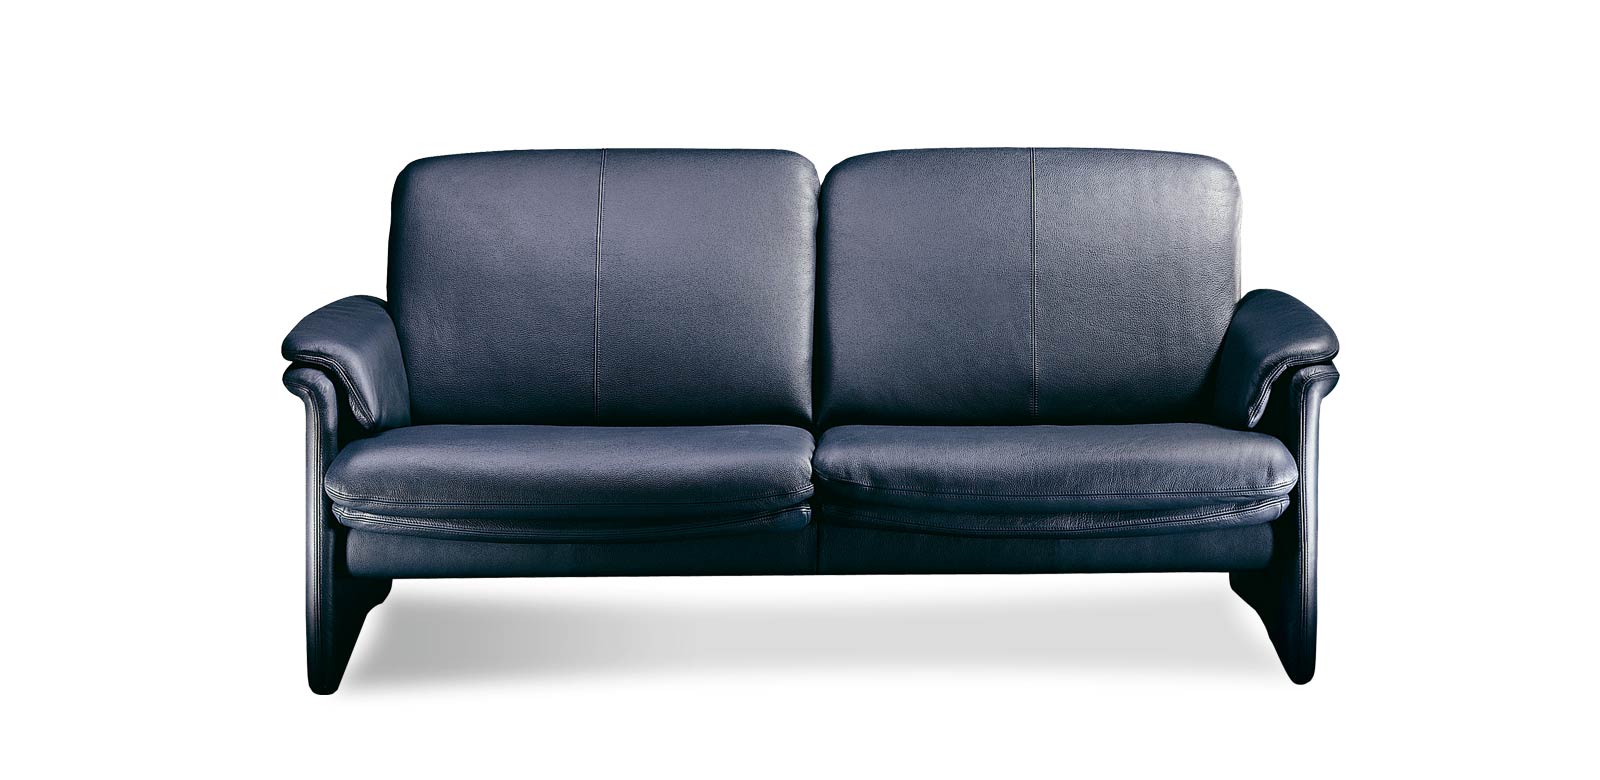 Front view of the City sofa in black leather.